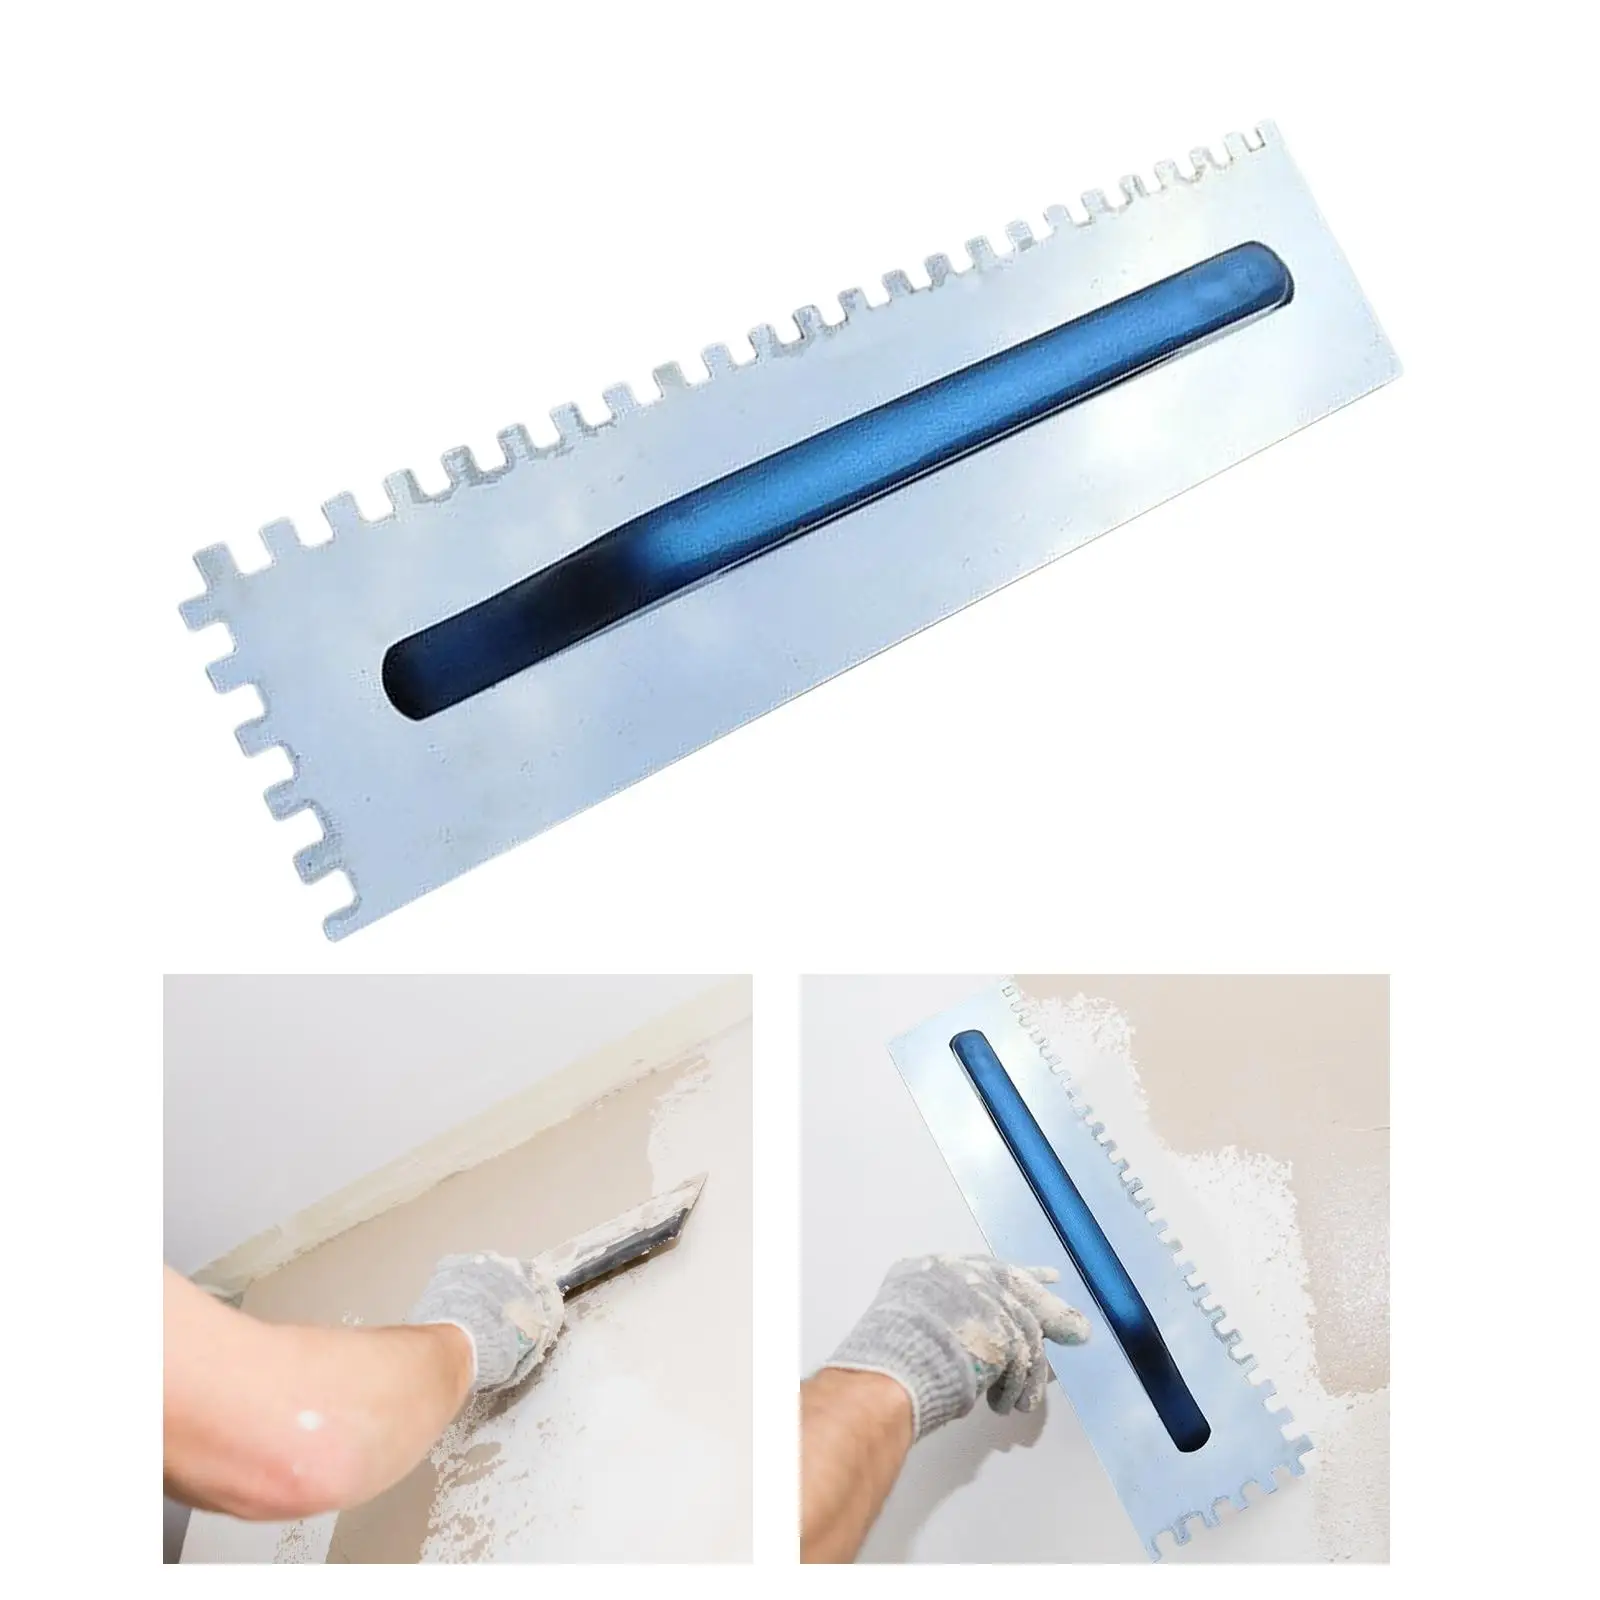 Stainless Steel Drywall Smoothing Spatula Tools Putty Tool Plastering Skimming